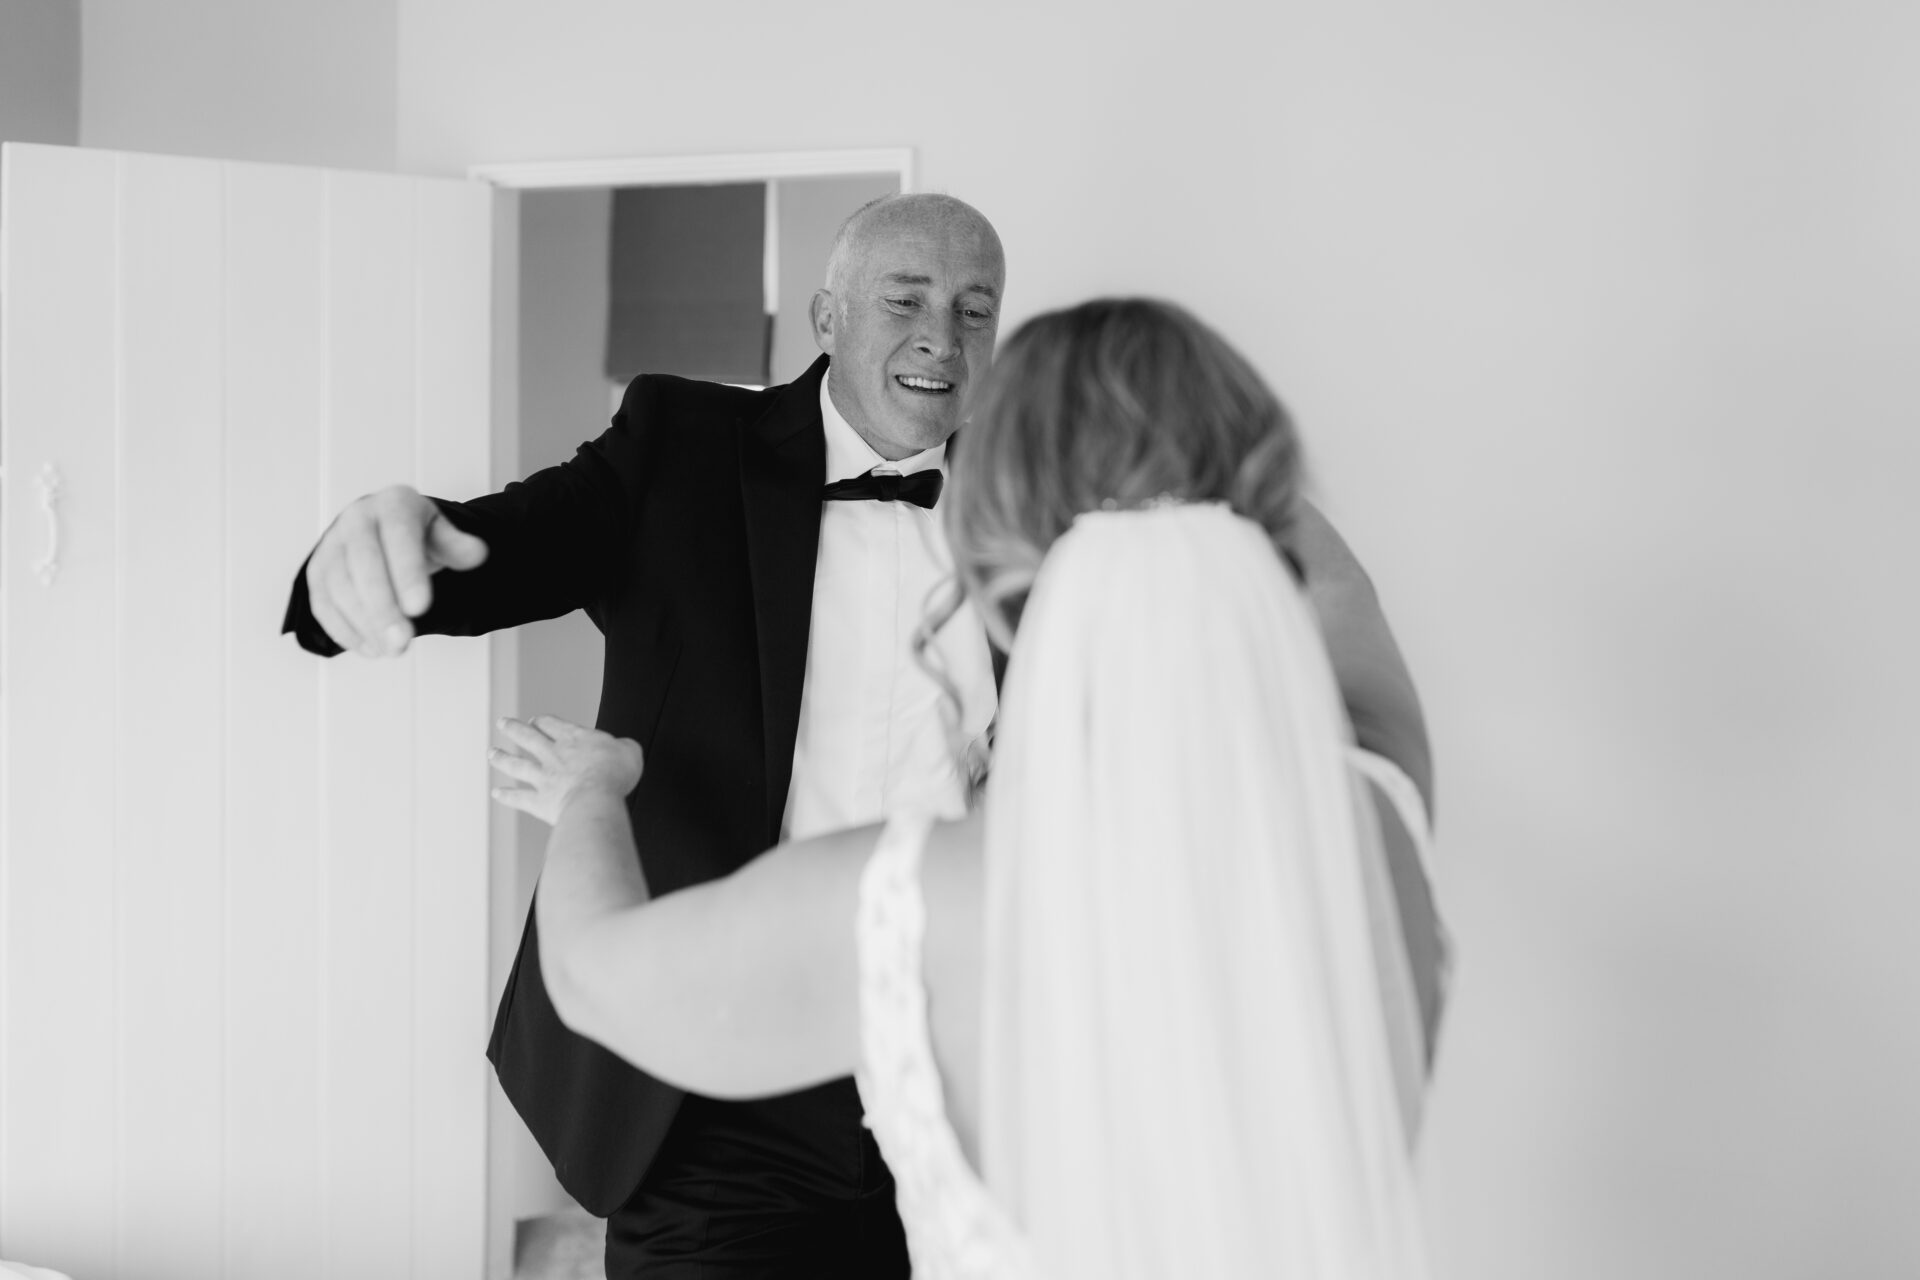 The father of the bride sees the bride for the first time